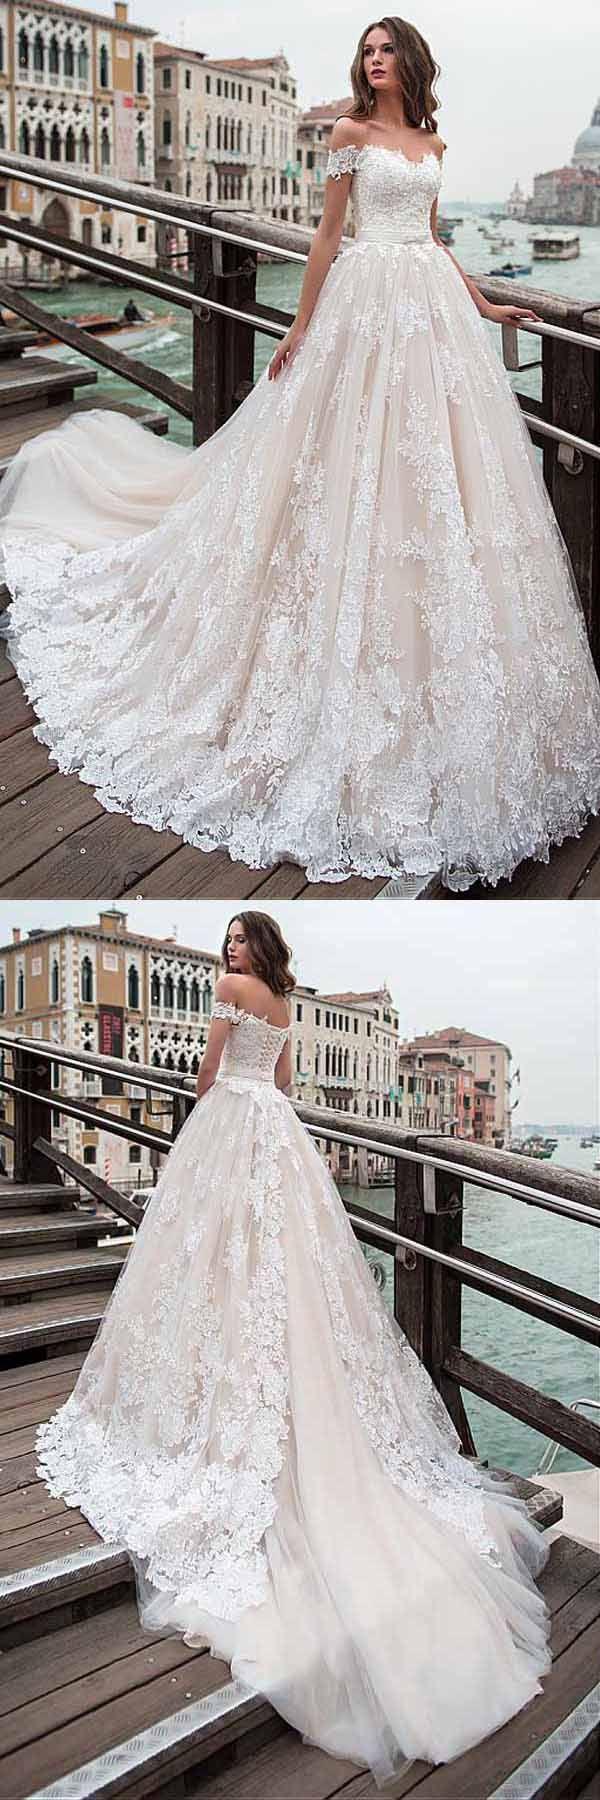 Wedding - Off-the-shoulder Neckline A-line Wedding Dress With Lace Appliques WD232